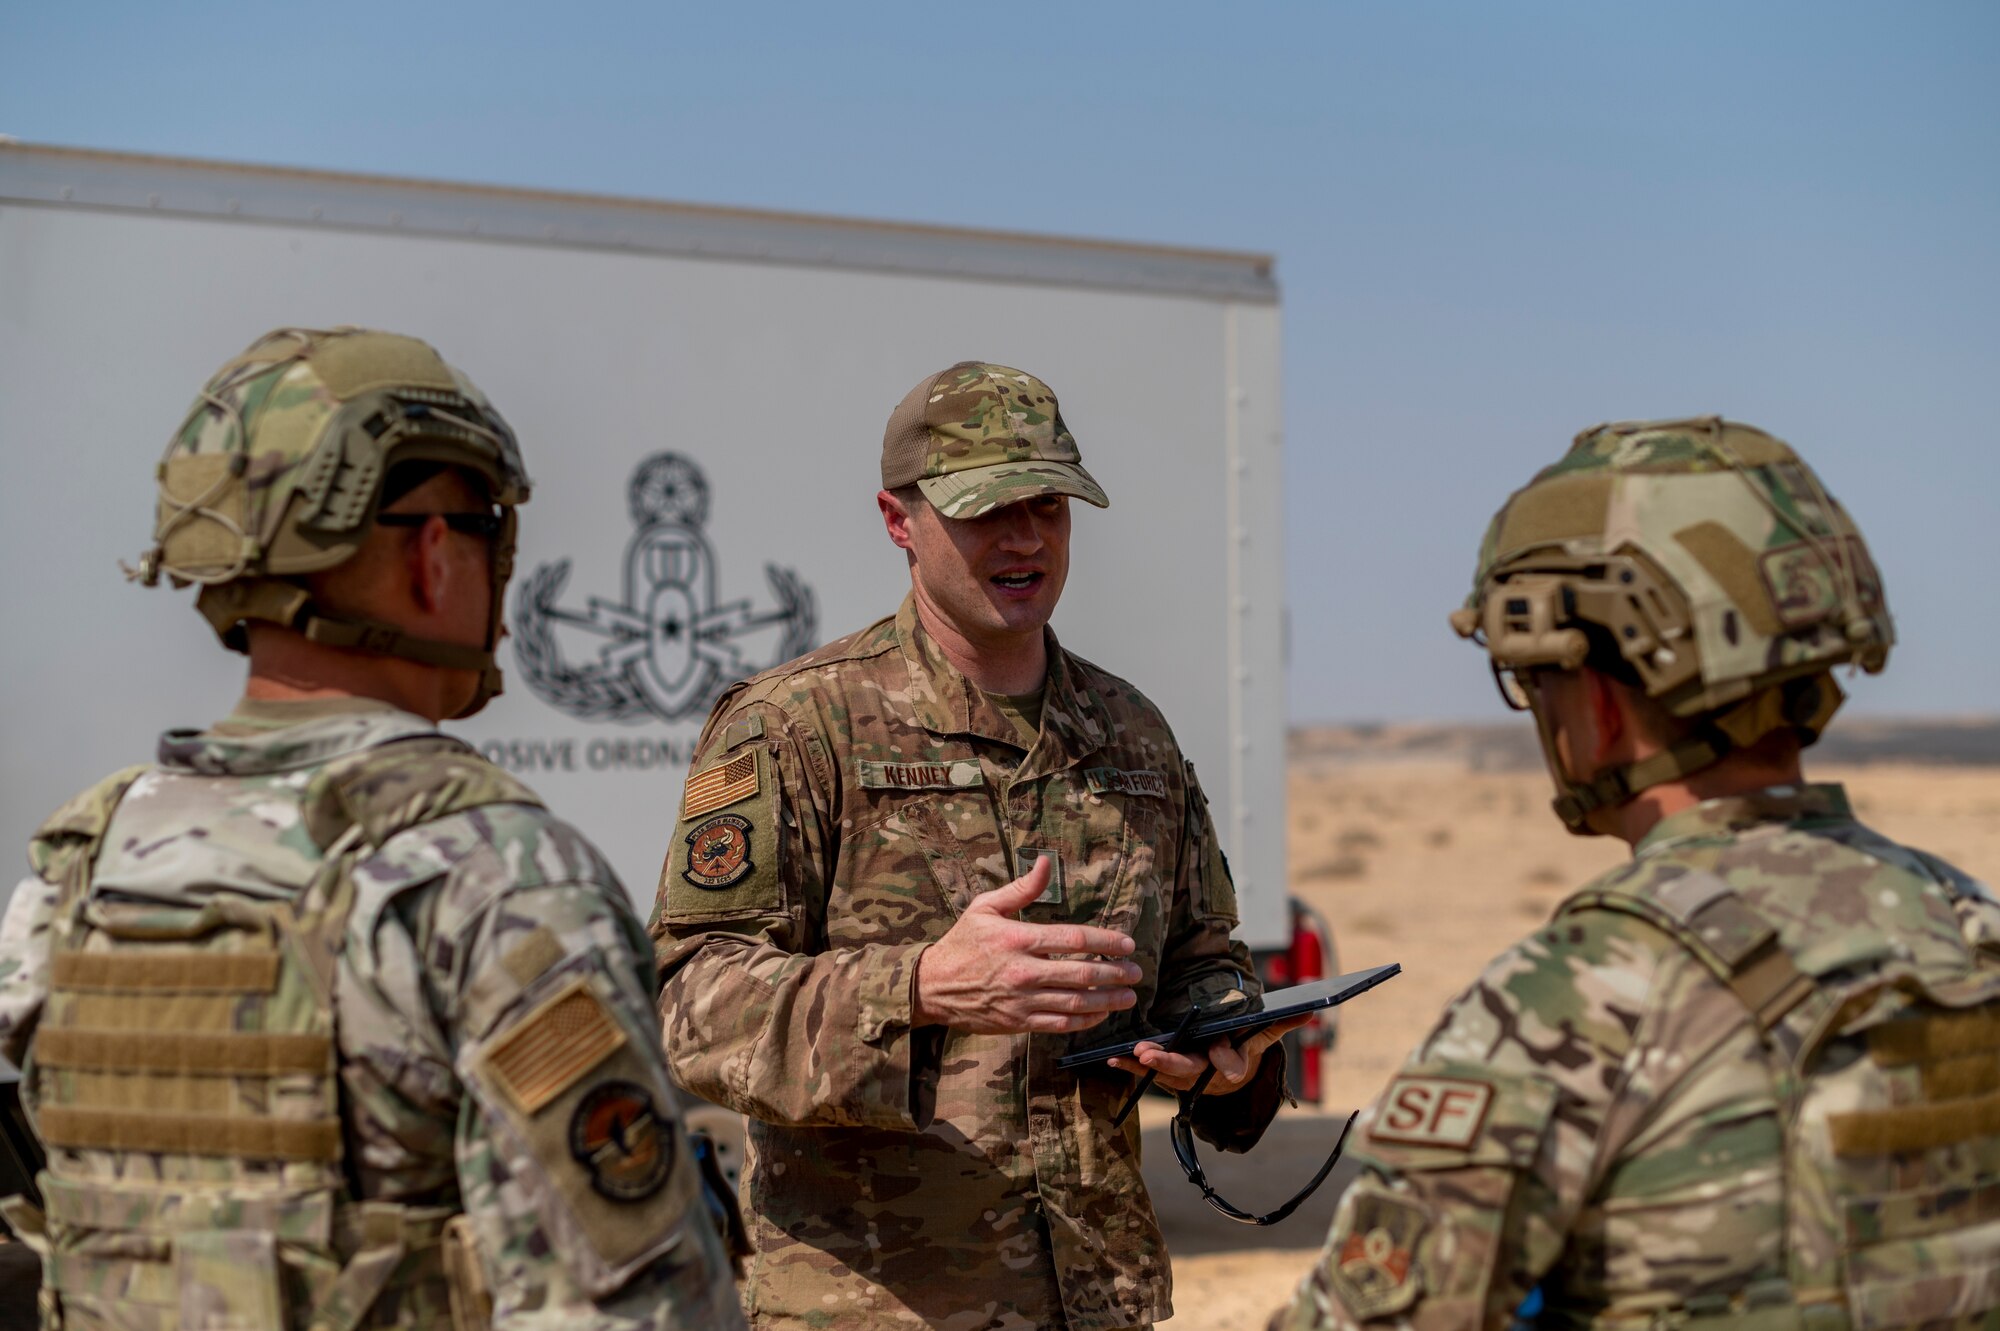 The joint exercise allowed multiple agencies to join forces to strengthen and refine Counter-Small Unmanned Aerial Systems tactics, techniques and procedures. (U.S. Air Force photo by Senior Airman Karla Parra)